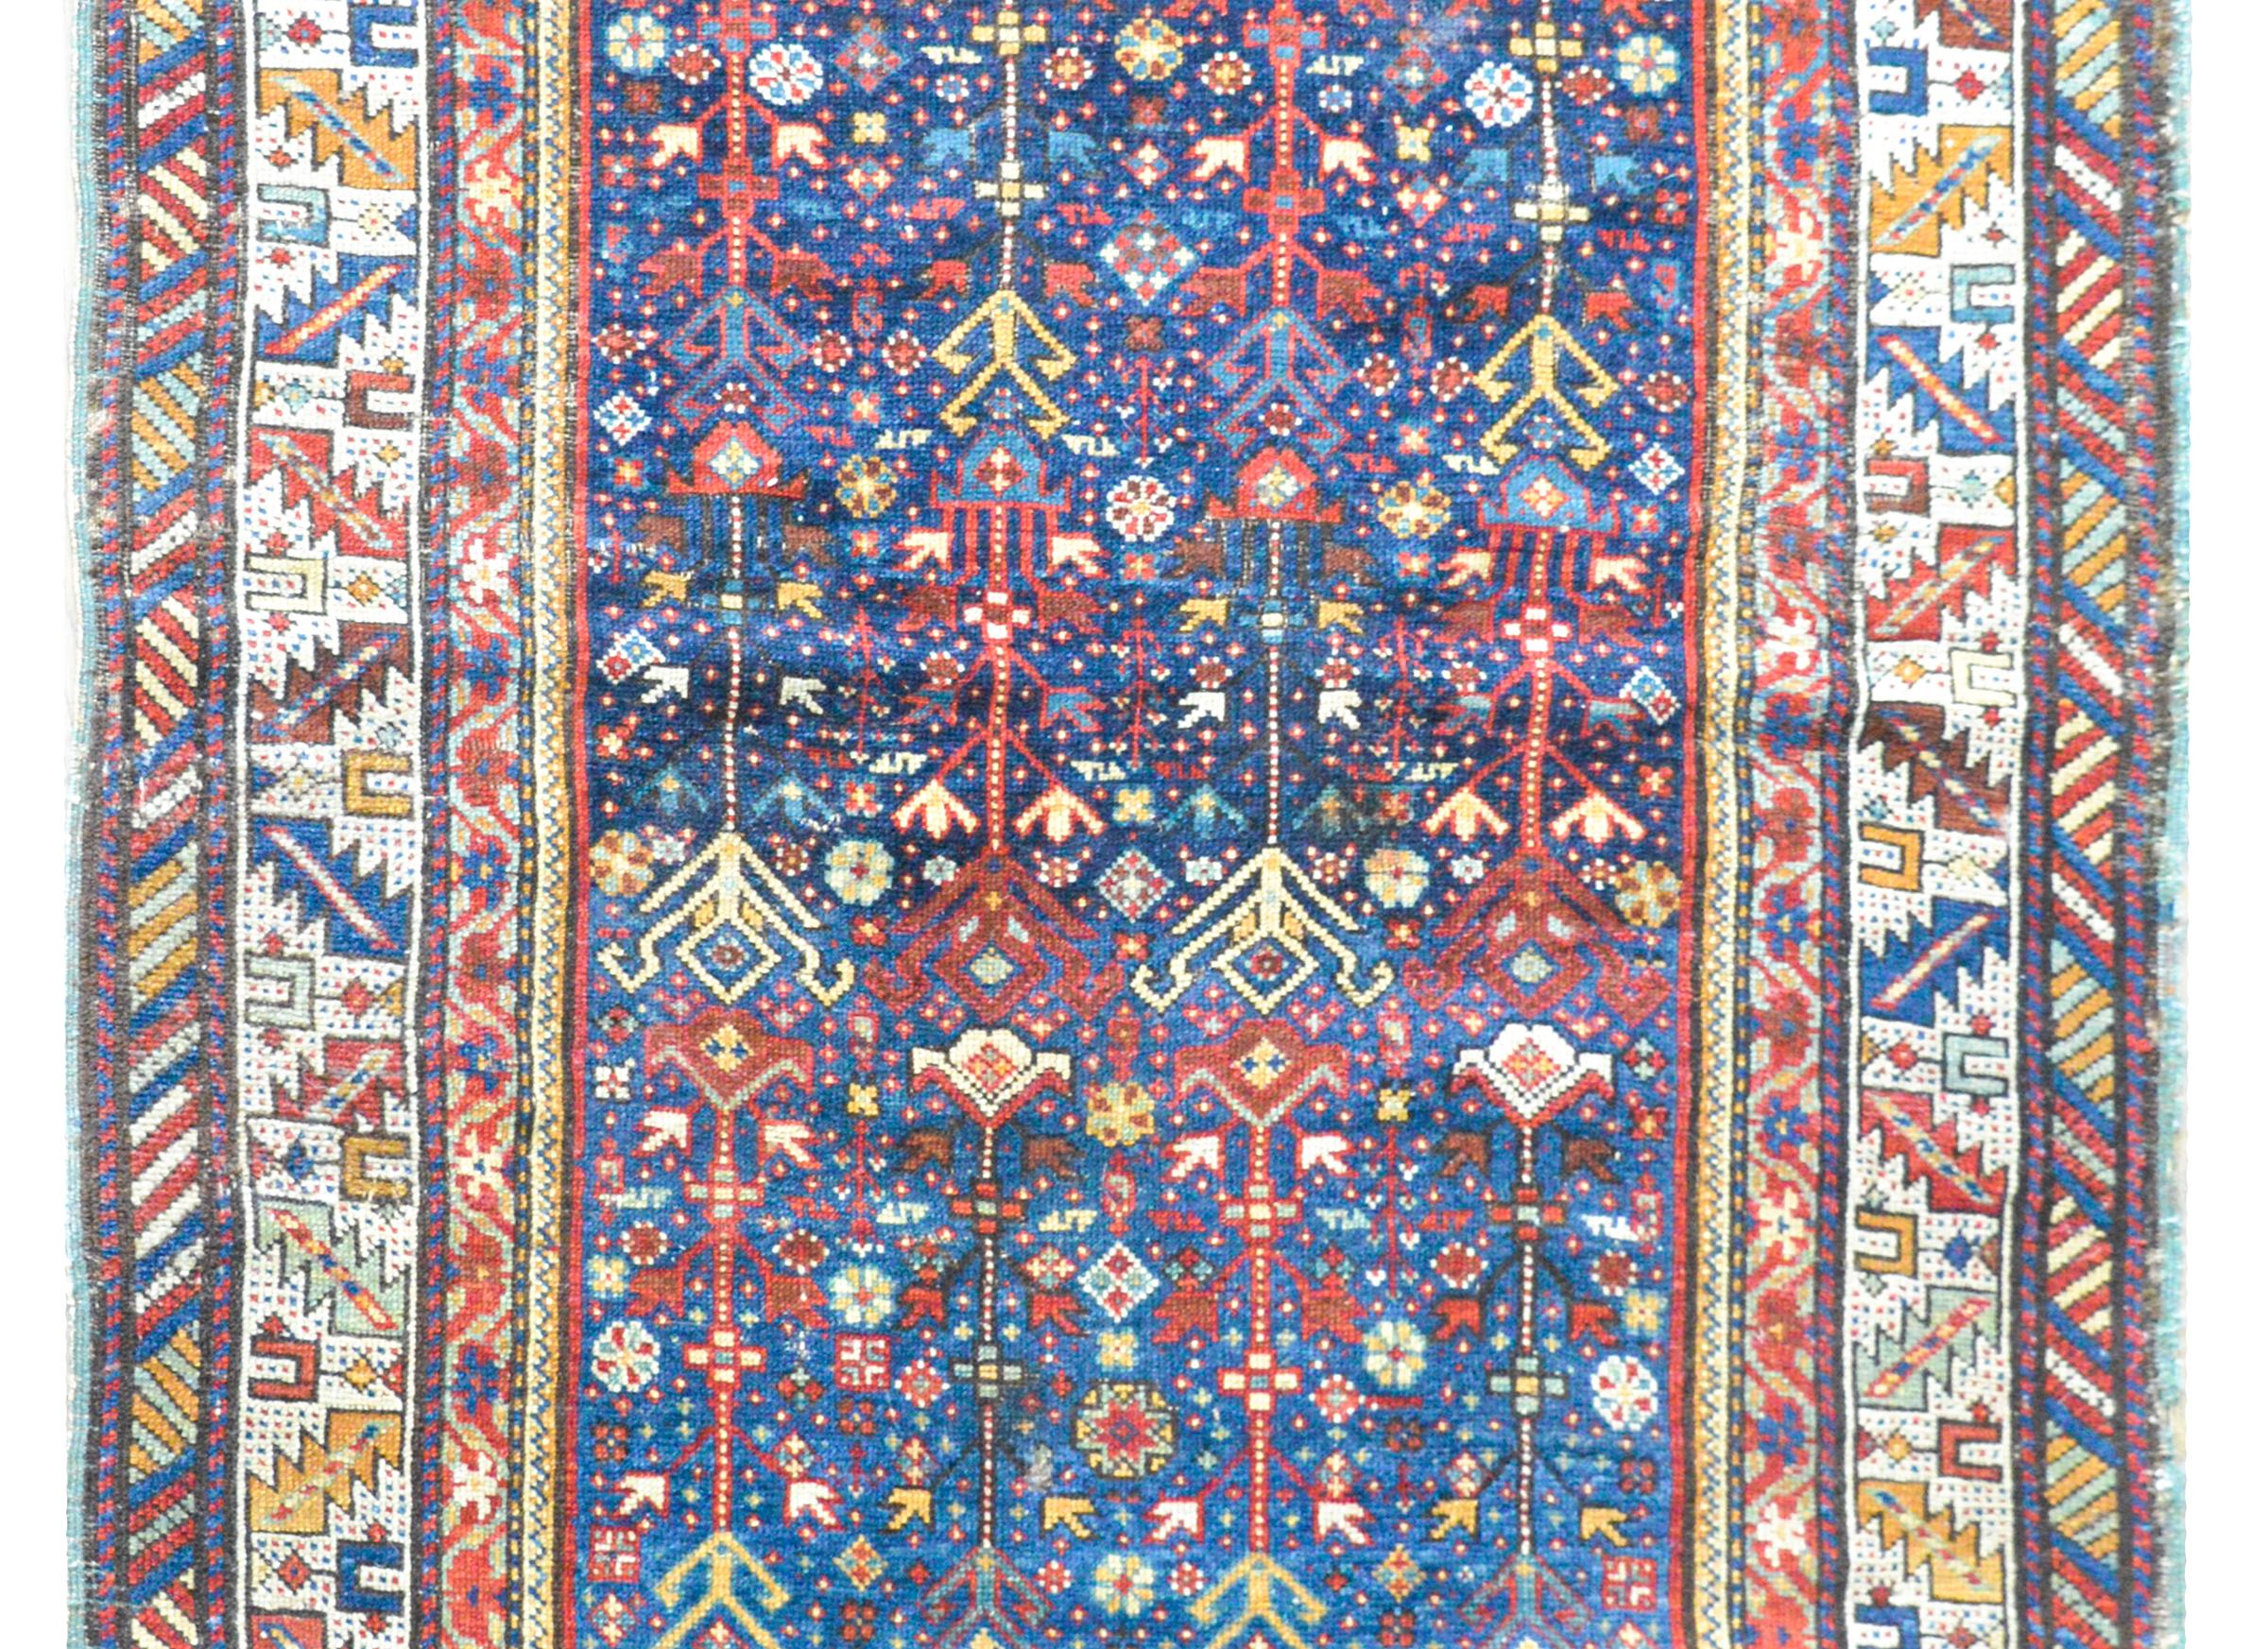 An outstanding early 20th century Persian Ganjeh rug with a fantastic stylized floral and vine pattern woven in bright crimson, gold, light indigo, and white set against an intensely woven field of flowers and all set against a dark indigo